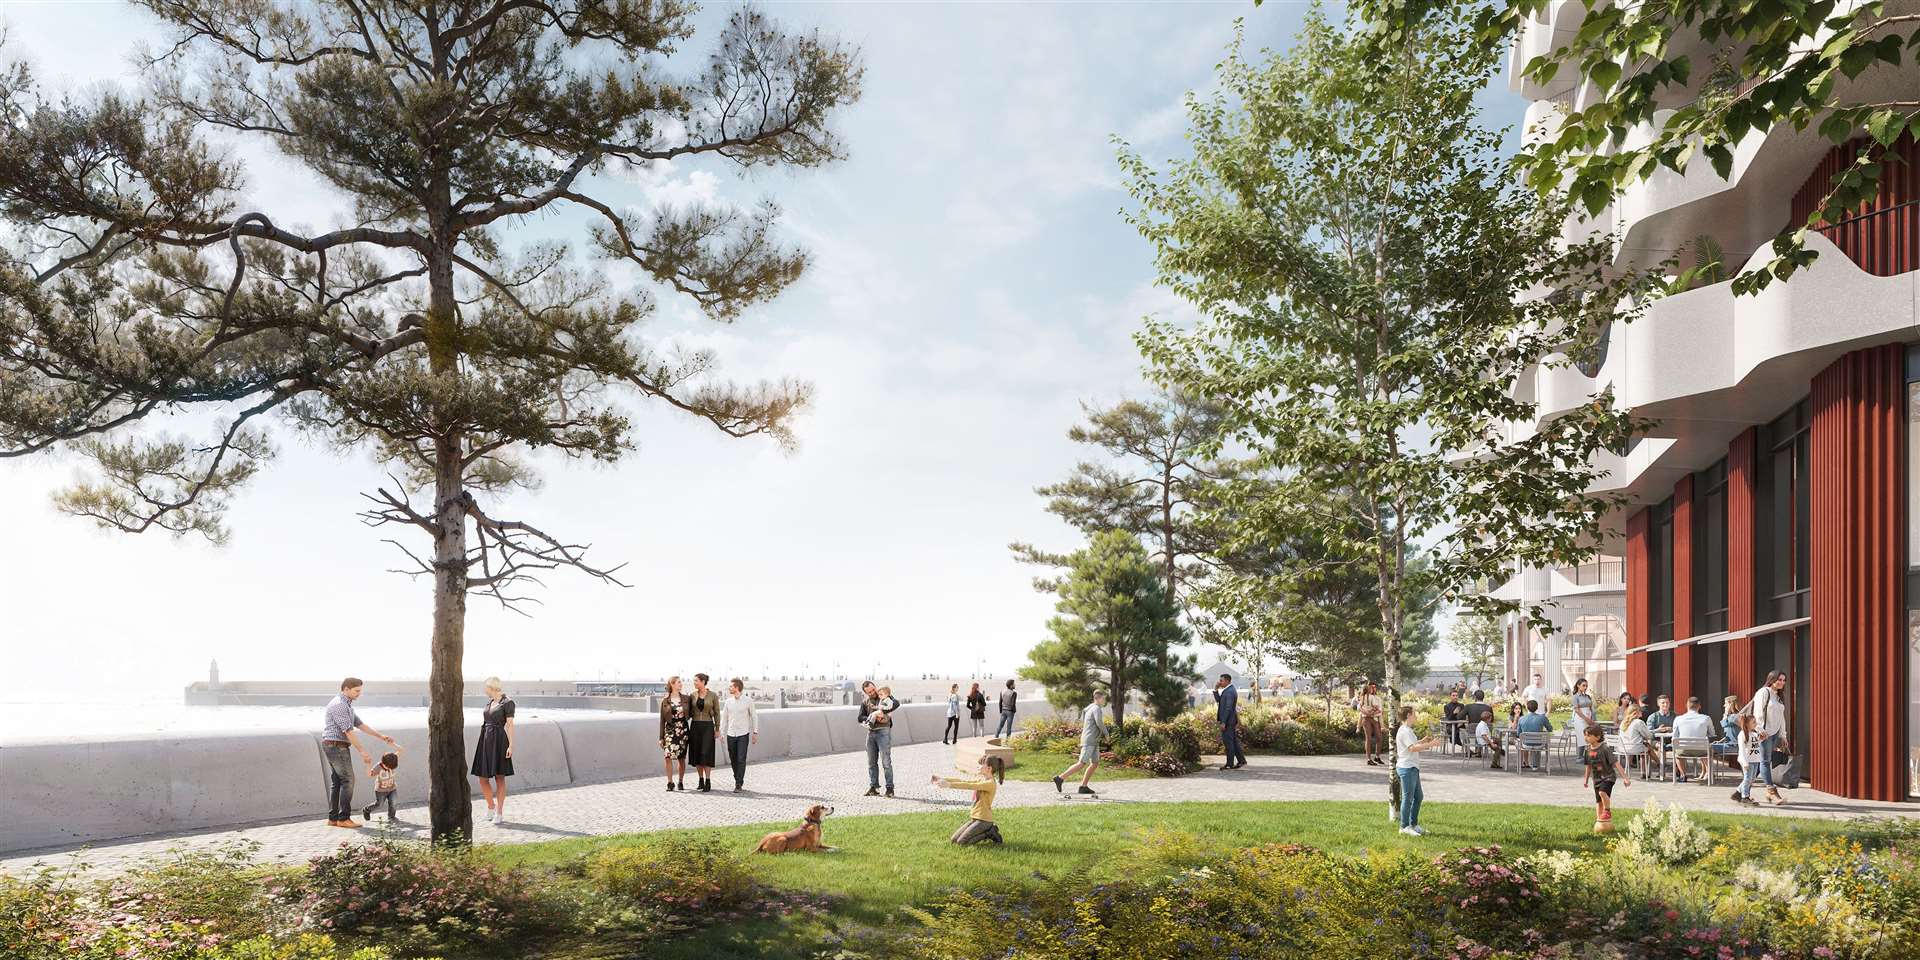 A new seafront park is now being proposed, with increased green spaces. Picture: FHSDC